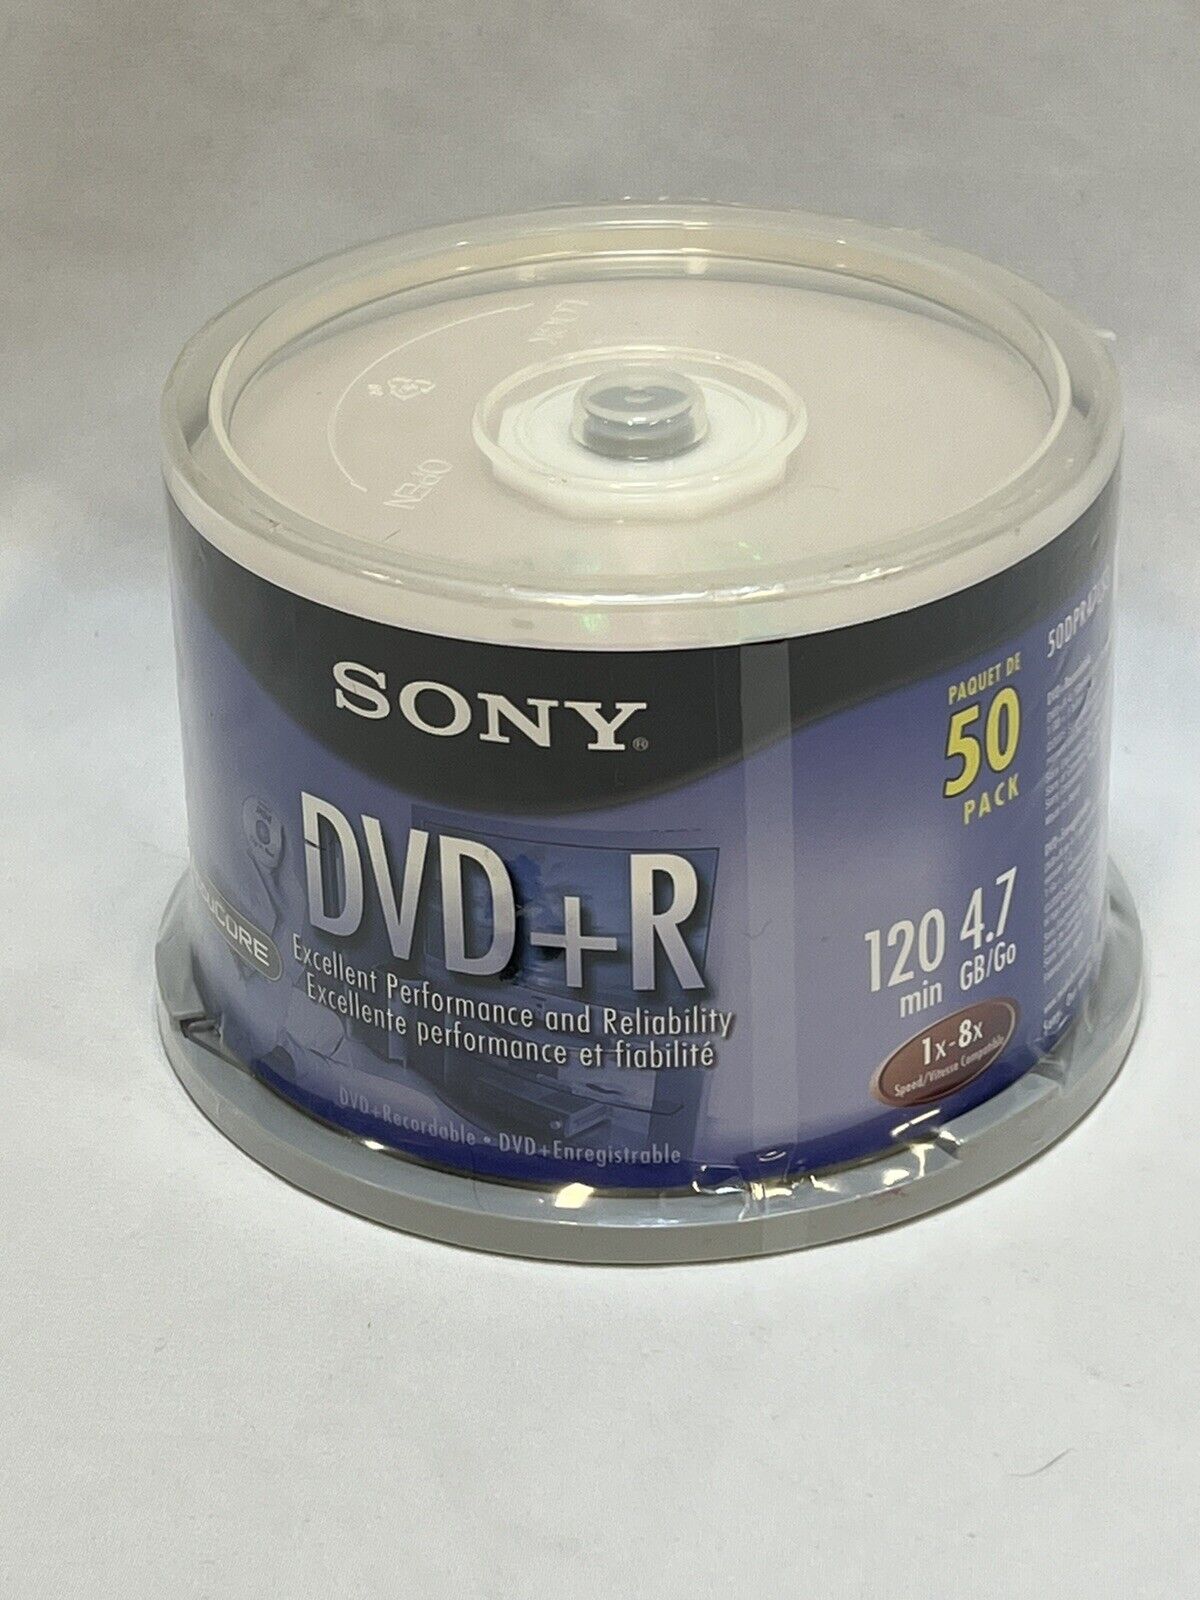 Sony DVD+R SEALED 50-Pack Spindle Blank Media 4.7GB -120 min 16x Accucore